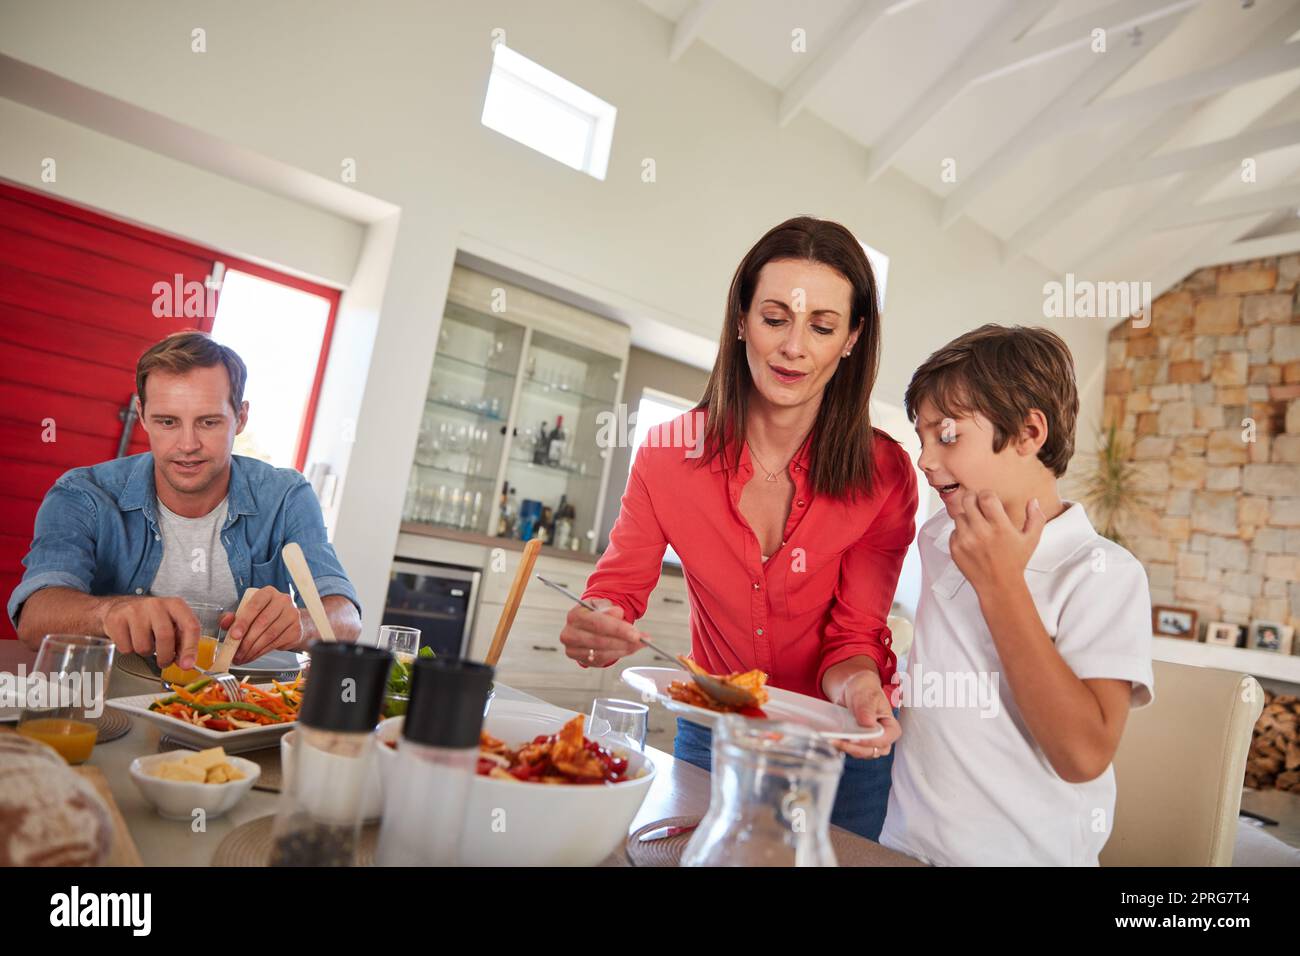 There is no love sincerer than the love of food. a happy family enjoying a home-cooked meal together at the table. Stock Photo